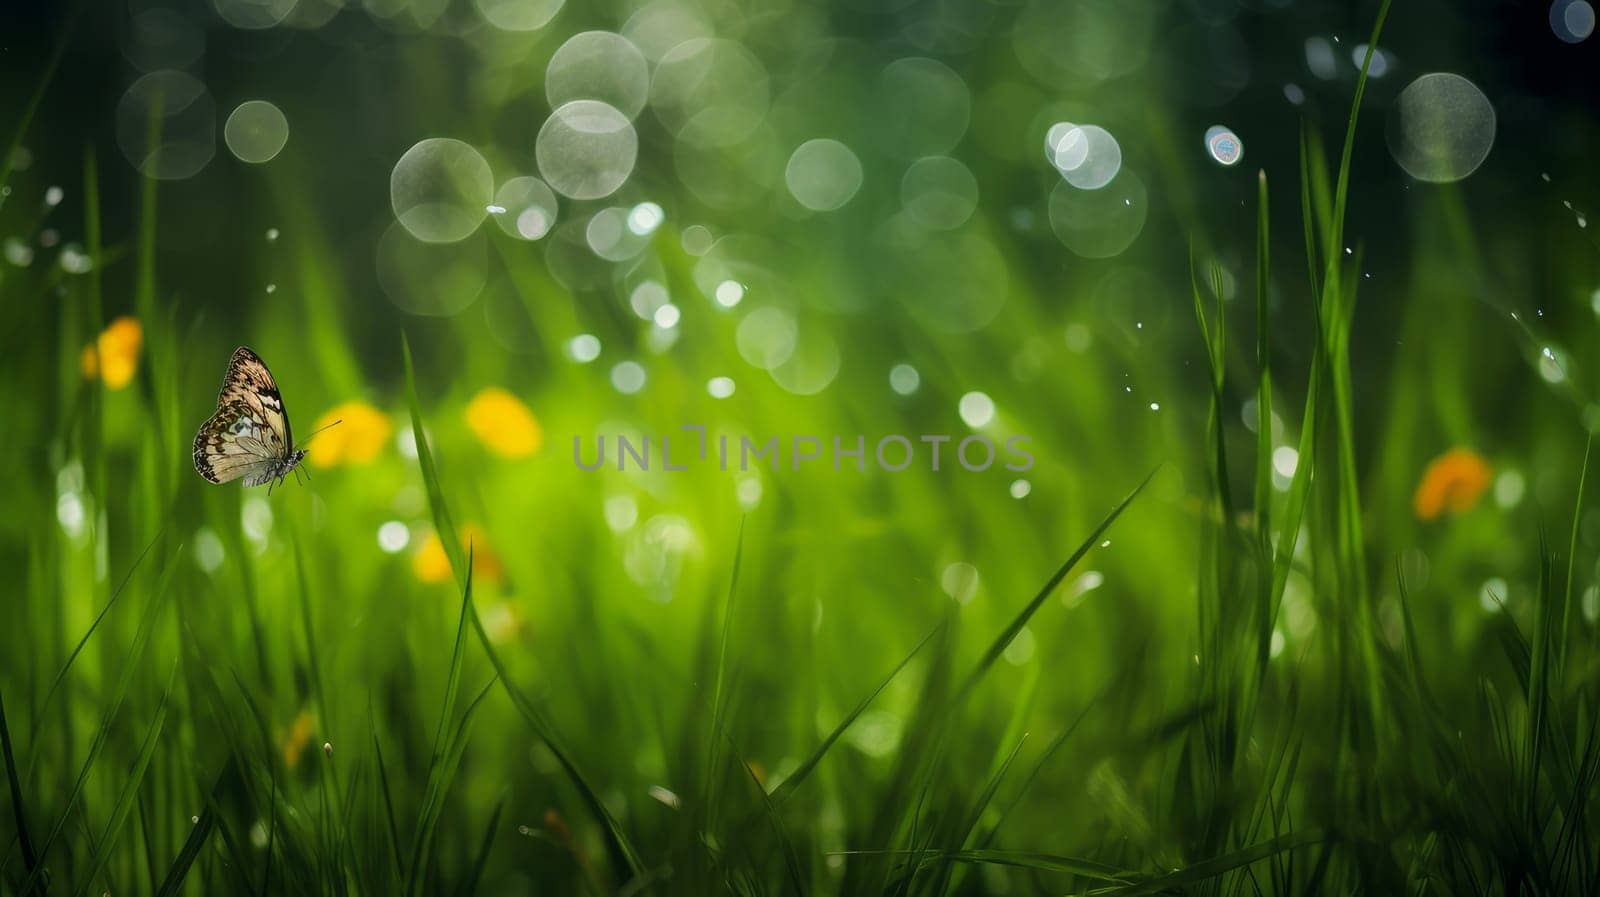 Abstract natural spring background with butterflies and green grass light rosy dark meadow flowers closeup with sun rays and light. Colorful artistic image with soft focus and beautiful bokeh in summer spring